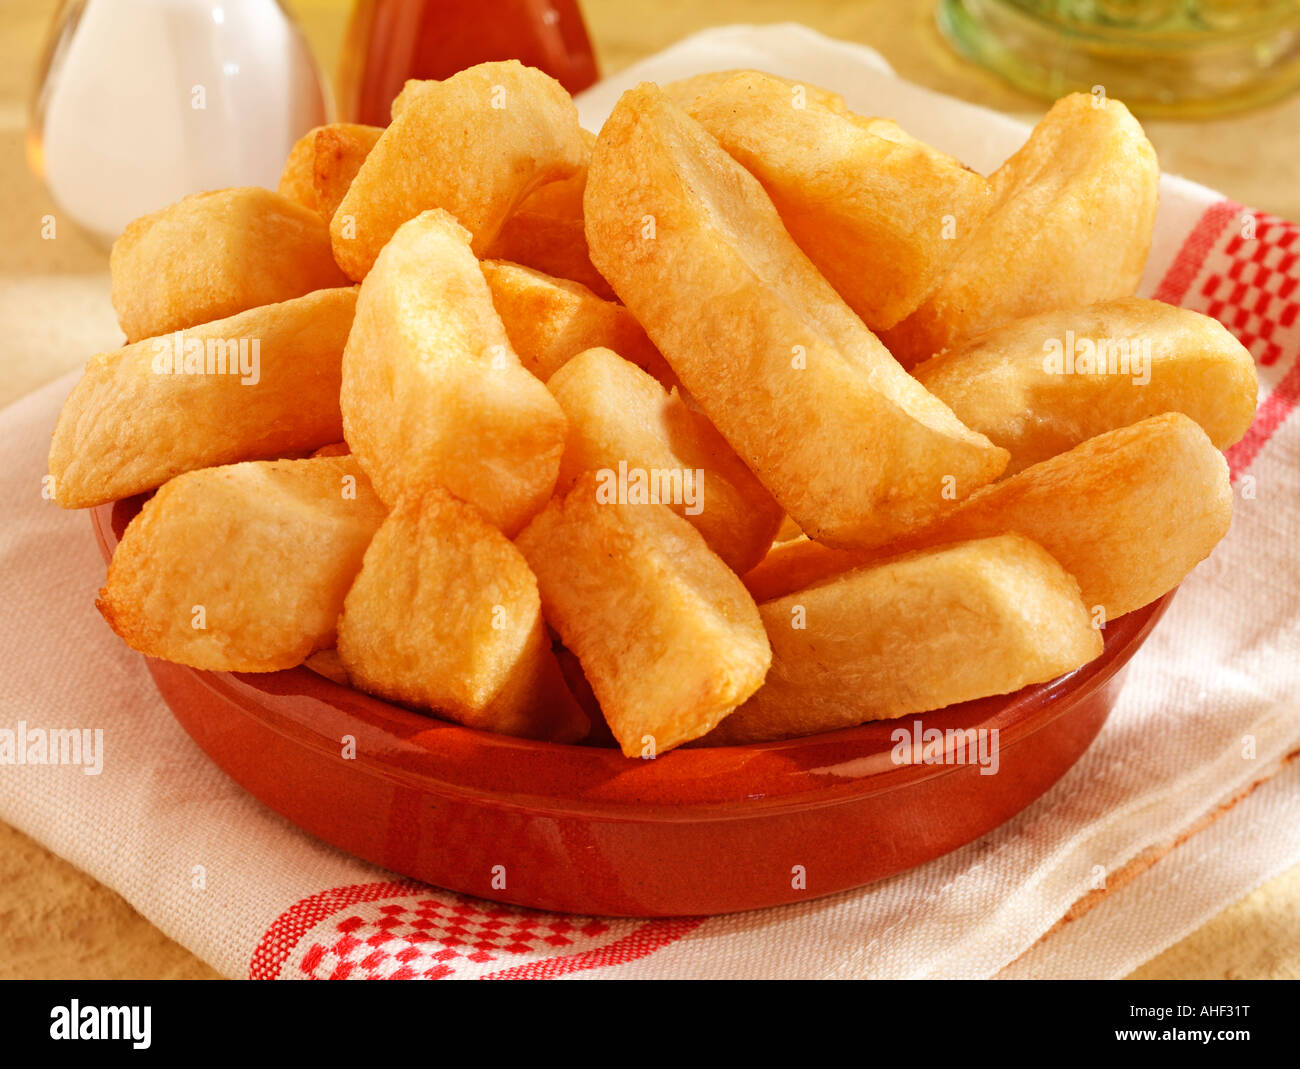 CHUNKY FRIED POTATO CHIPS OR THICK CUT FRENCH FRIES Stock